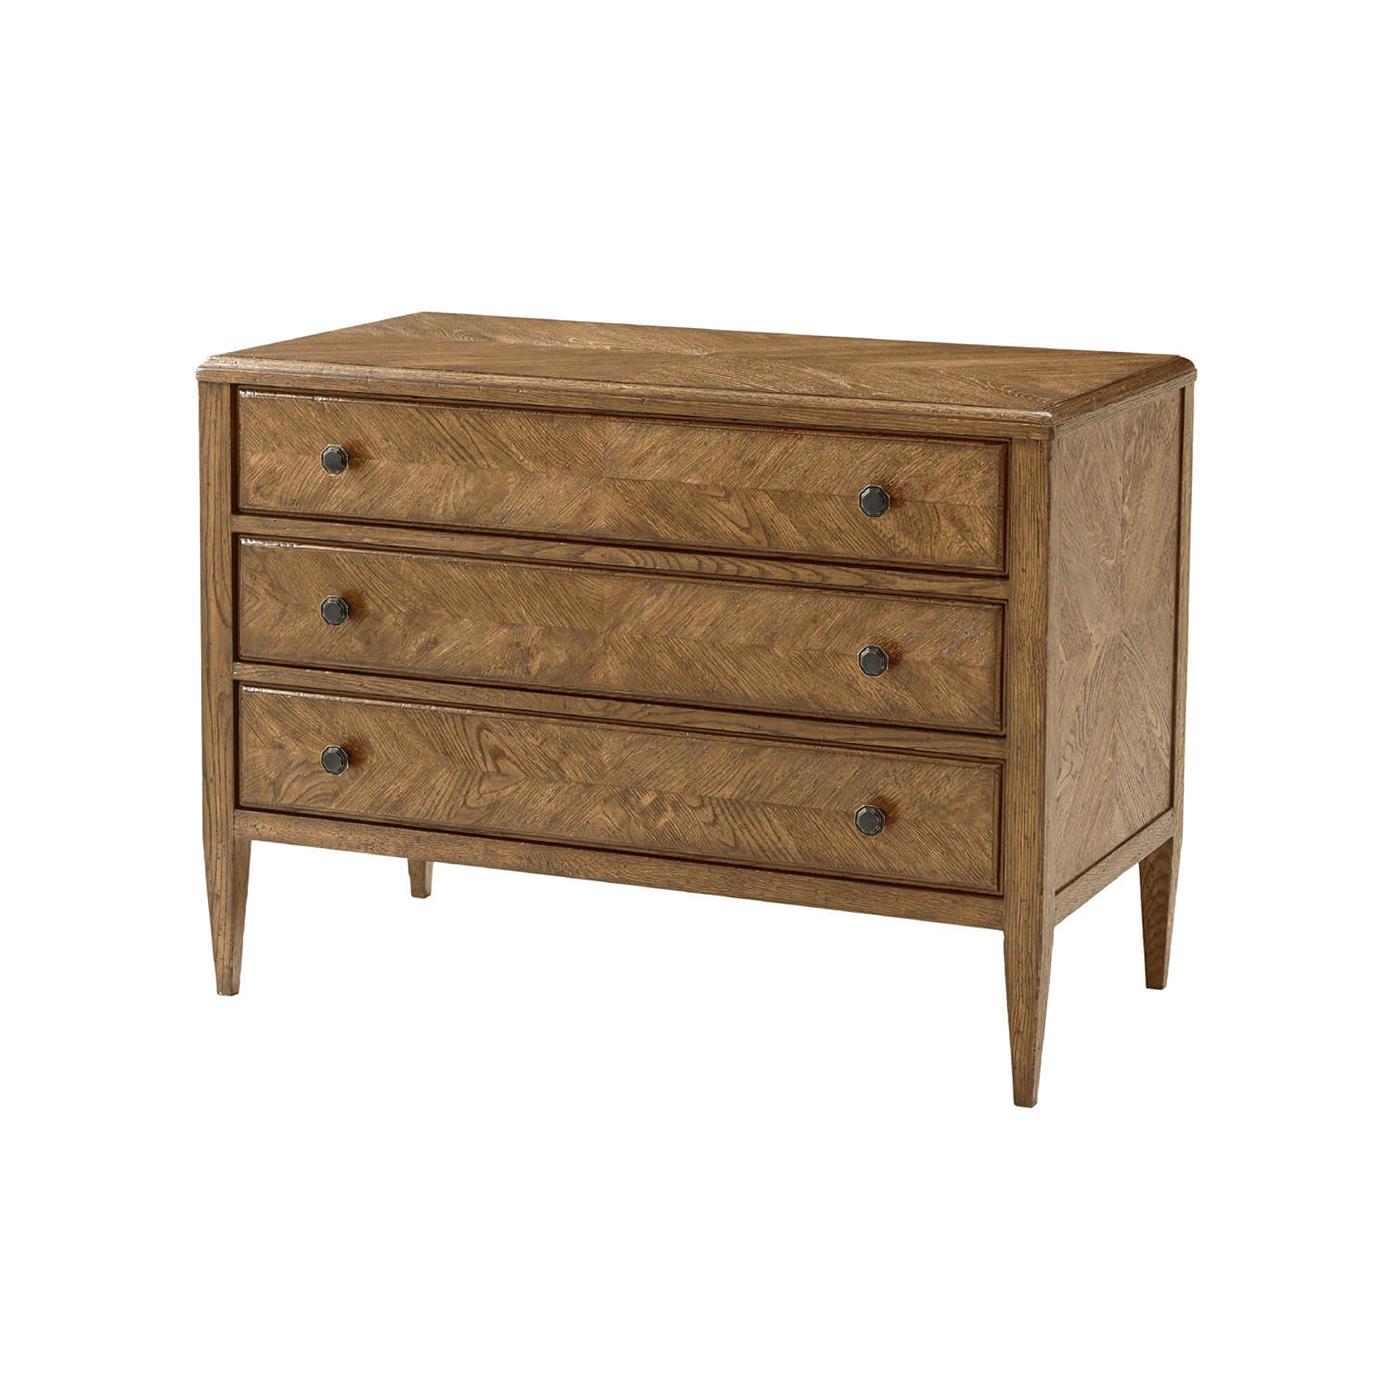 A light oak parquetry chest of drawers in dawn finish. It has mirrored herringbone oak parquetry drawers, classically tapered legs, and six Verde Bronze finish handles. 
Shown in dawn finish.
Dimensions: 38